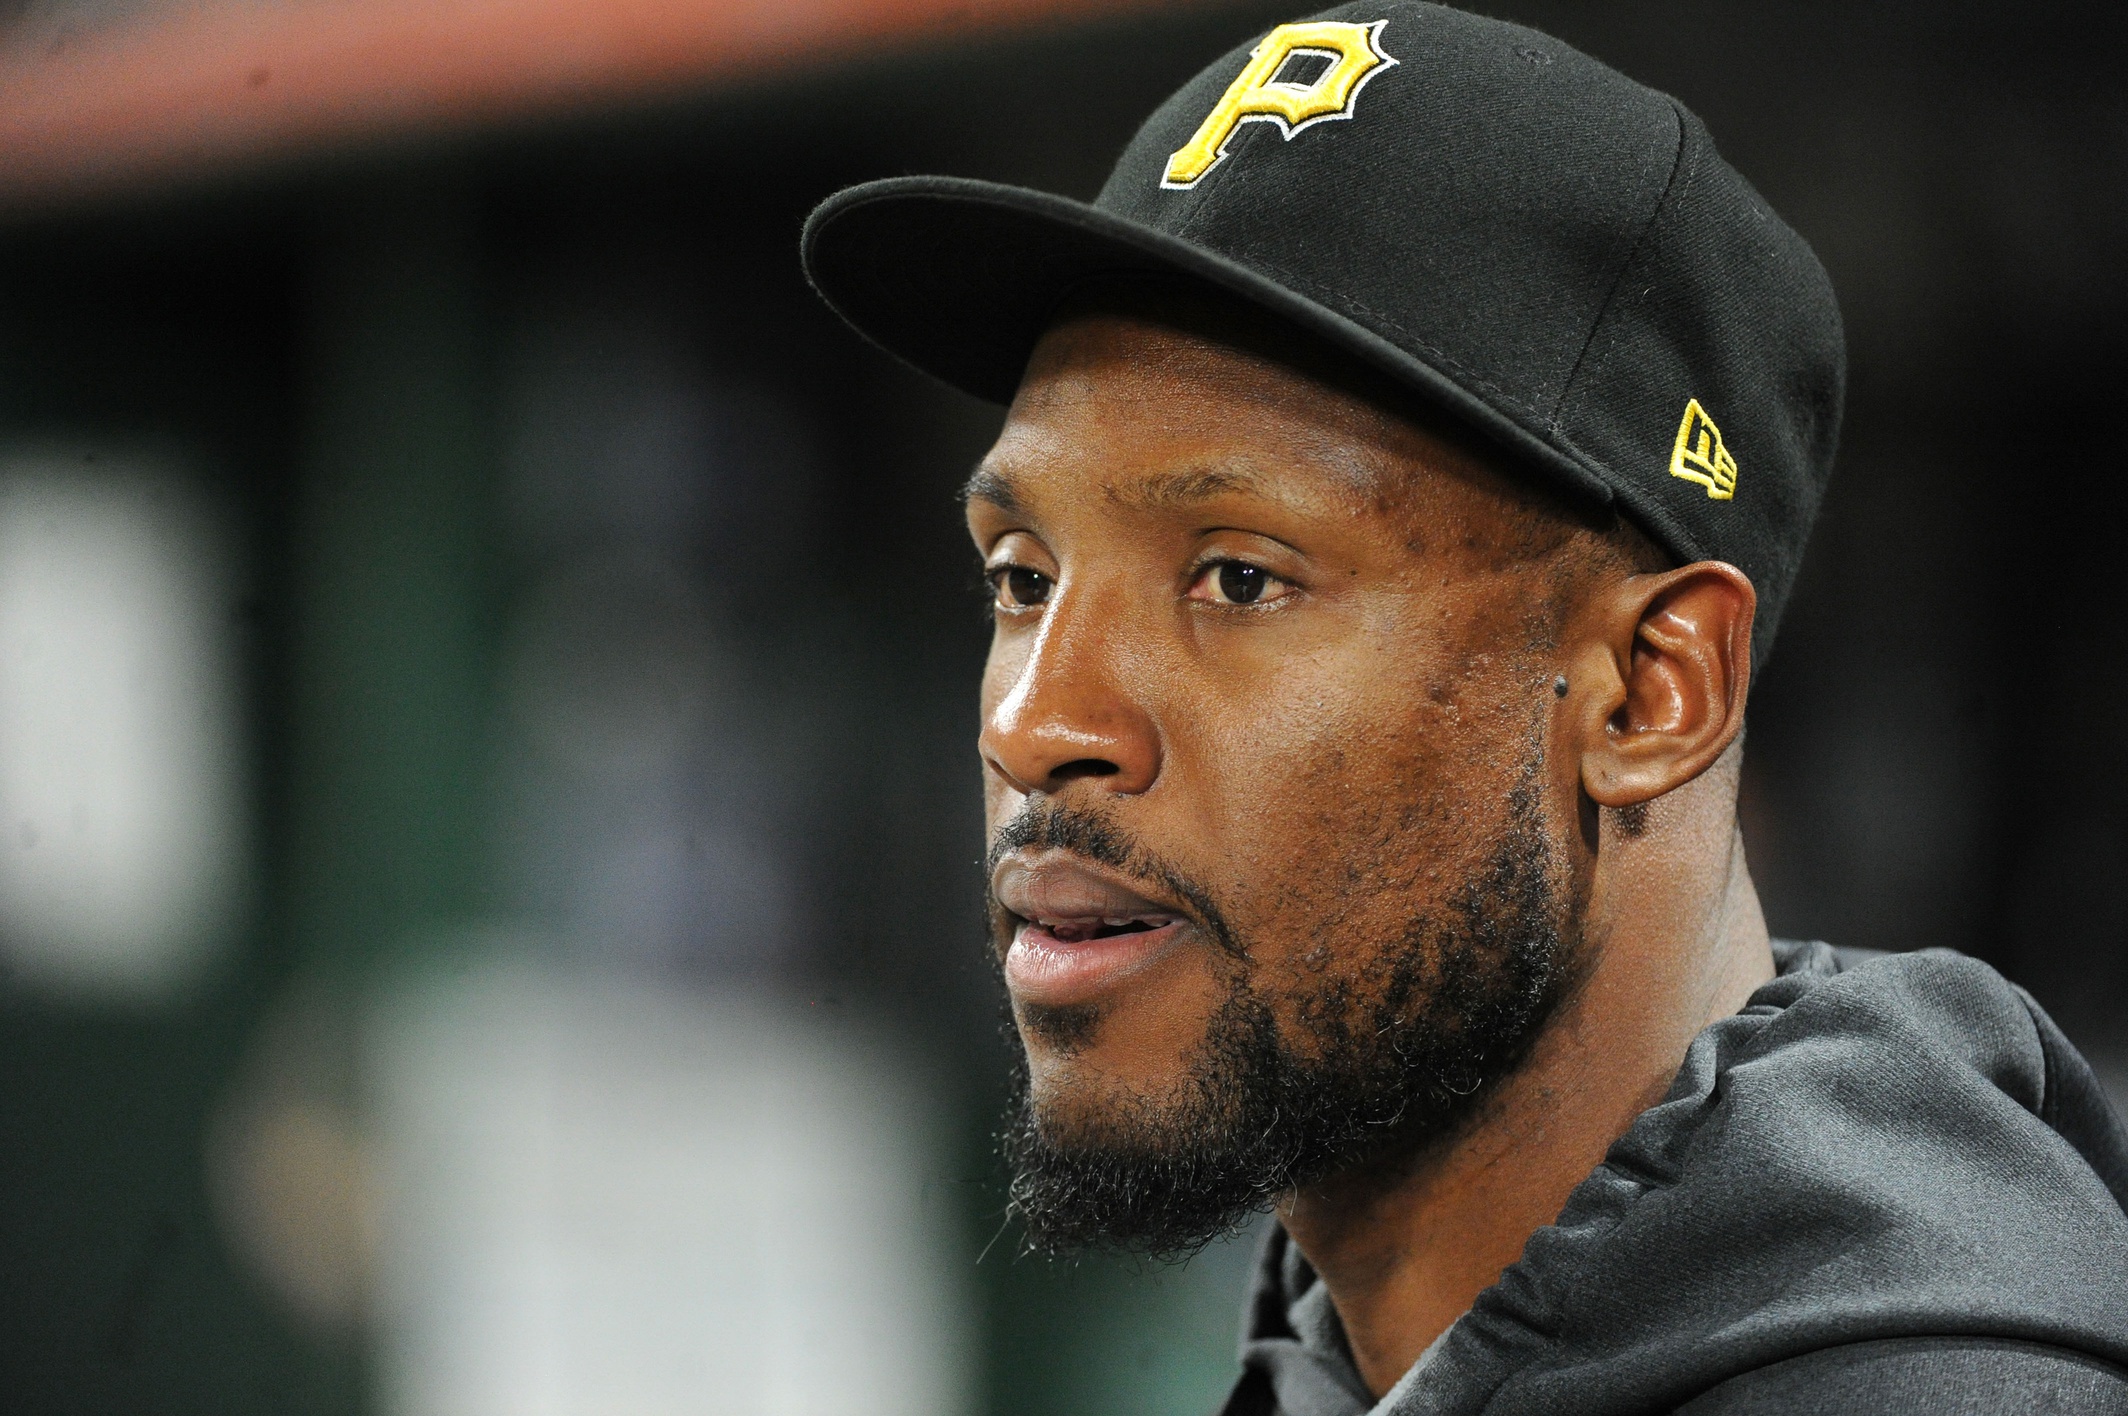 What Happened to MLB Star Starling Marte's Wife? She Passed Away